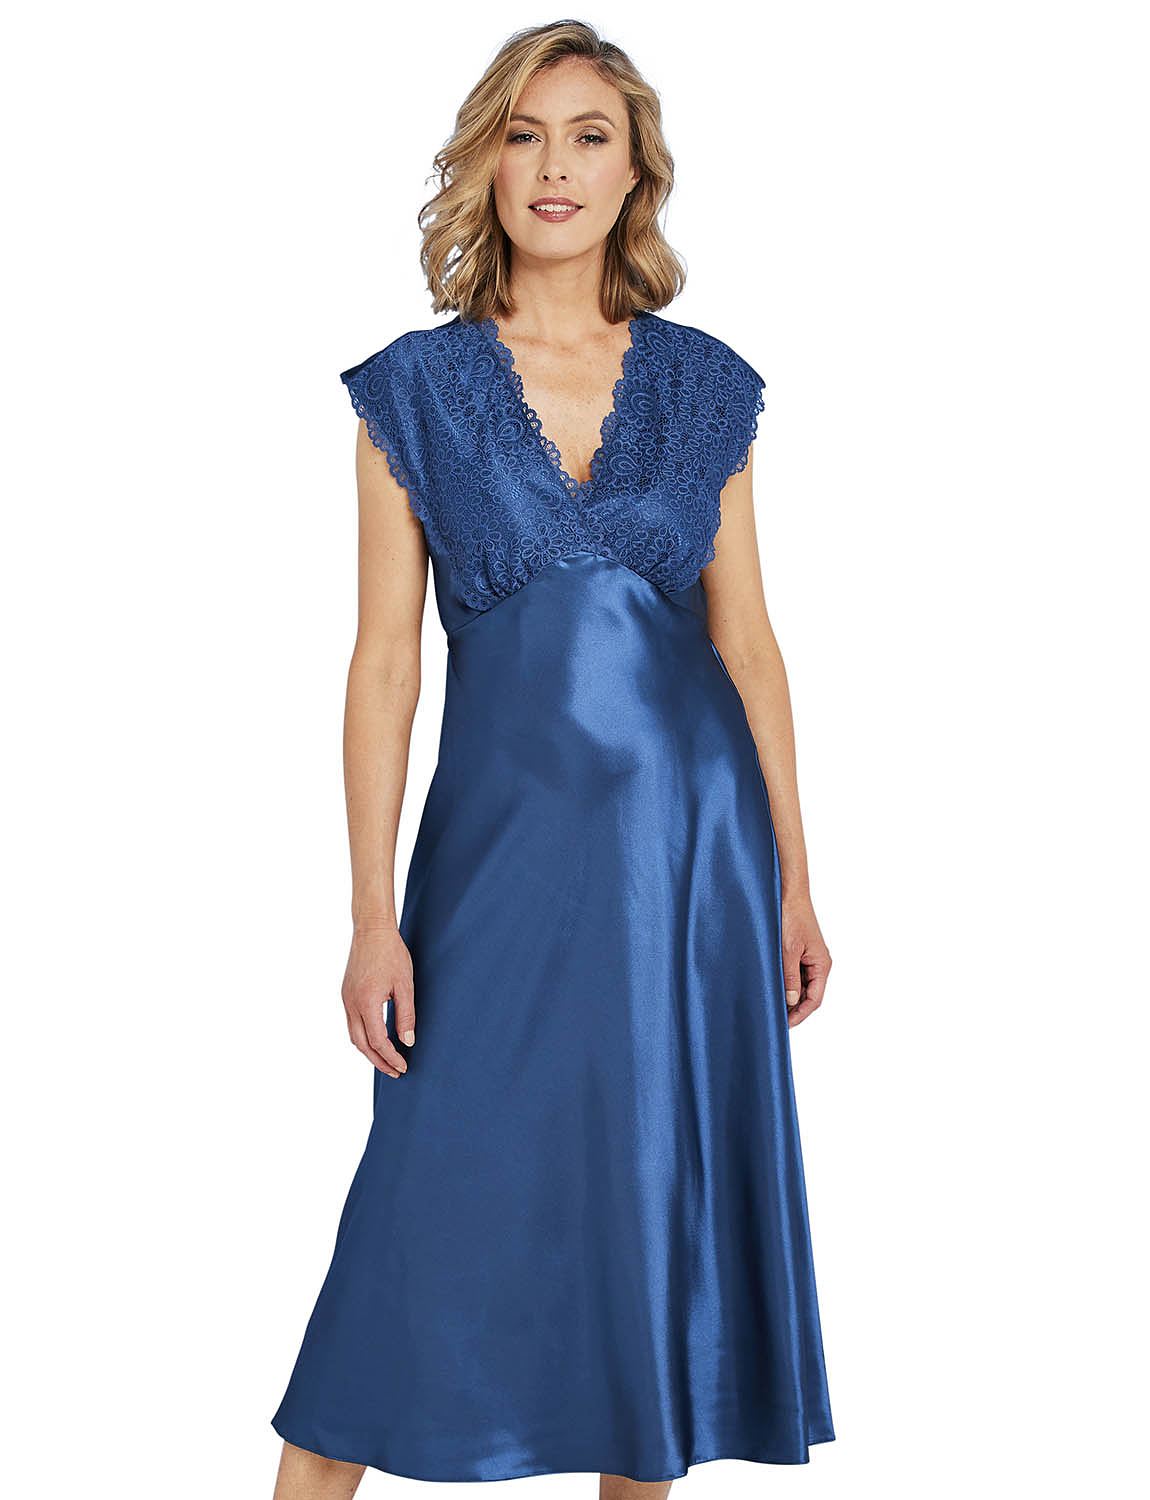 Luxury Satin and Lace Nightdress | Chums